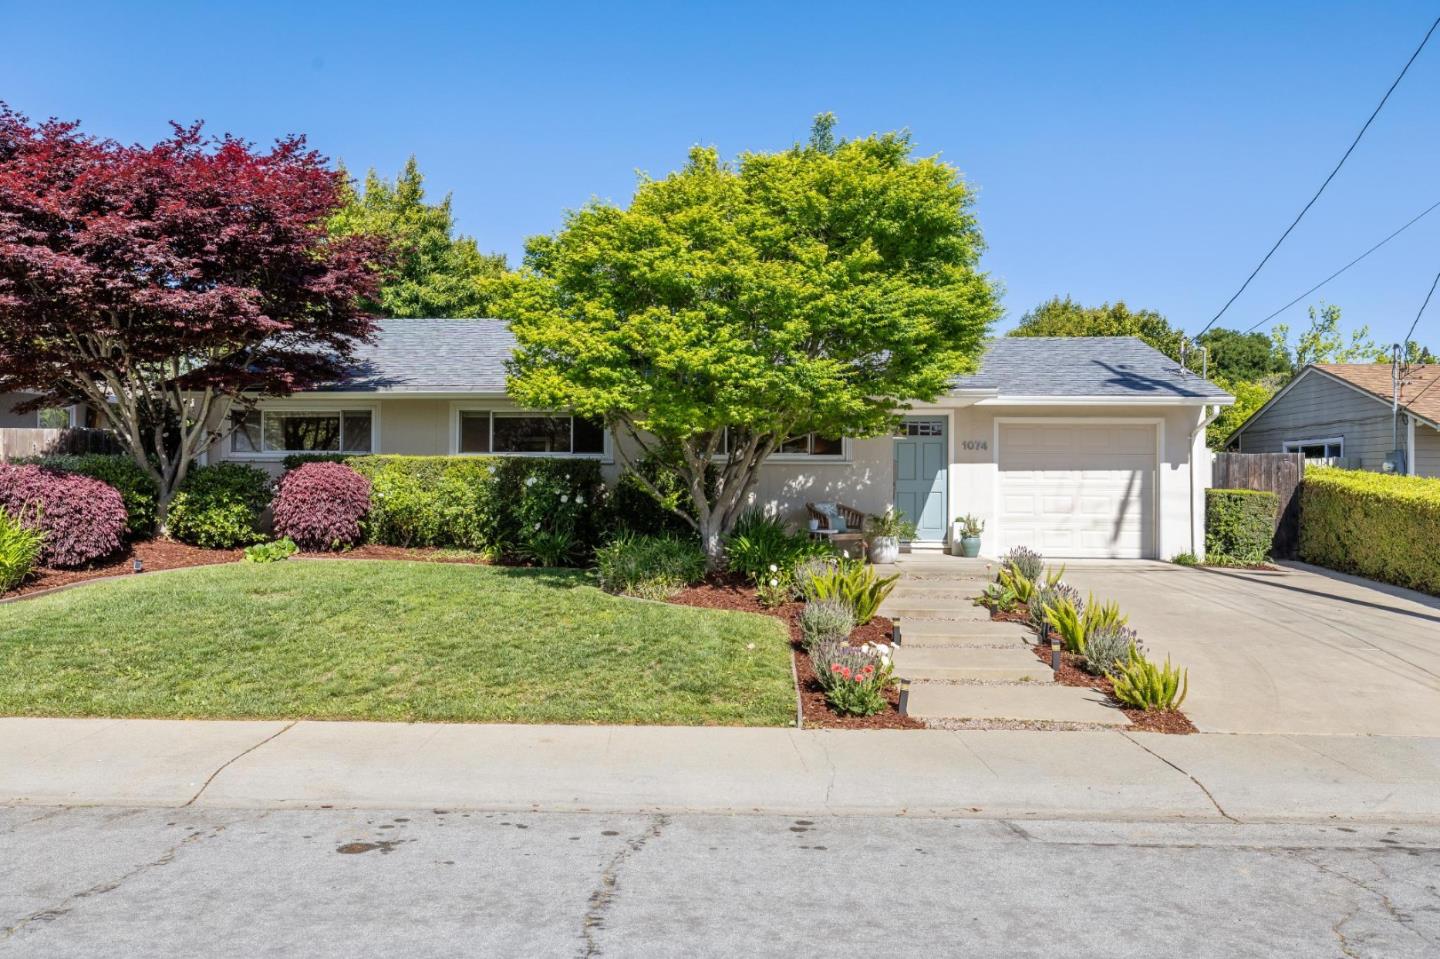 Photo of 1074 Judson Dr in Mountain View, CA